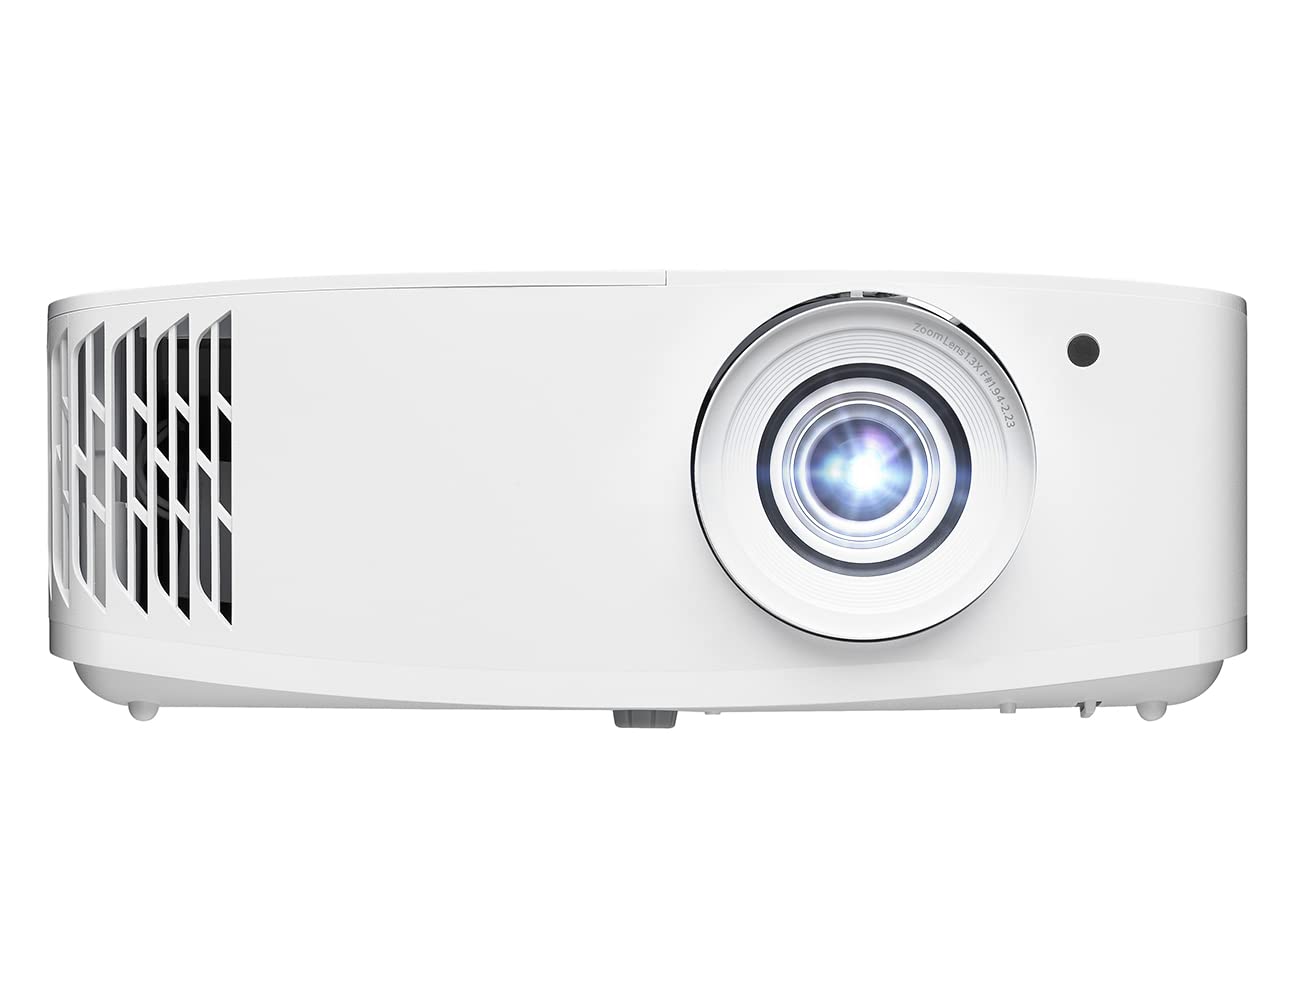 Optoma UHD55 4K Ultra HD DLP Home Theater and Gaming Projector $749